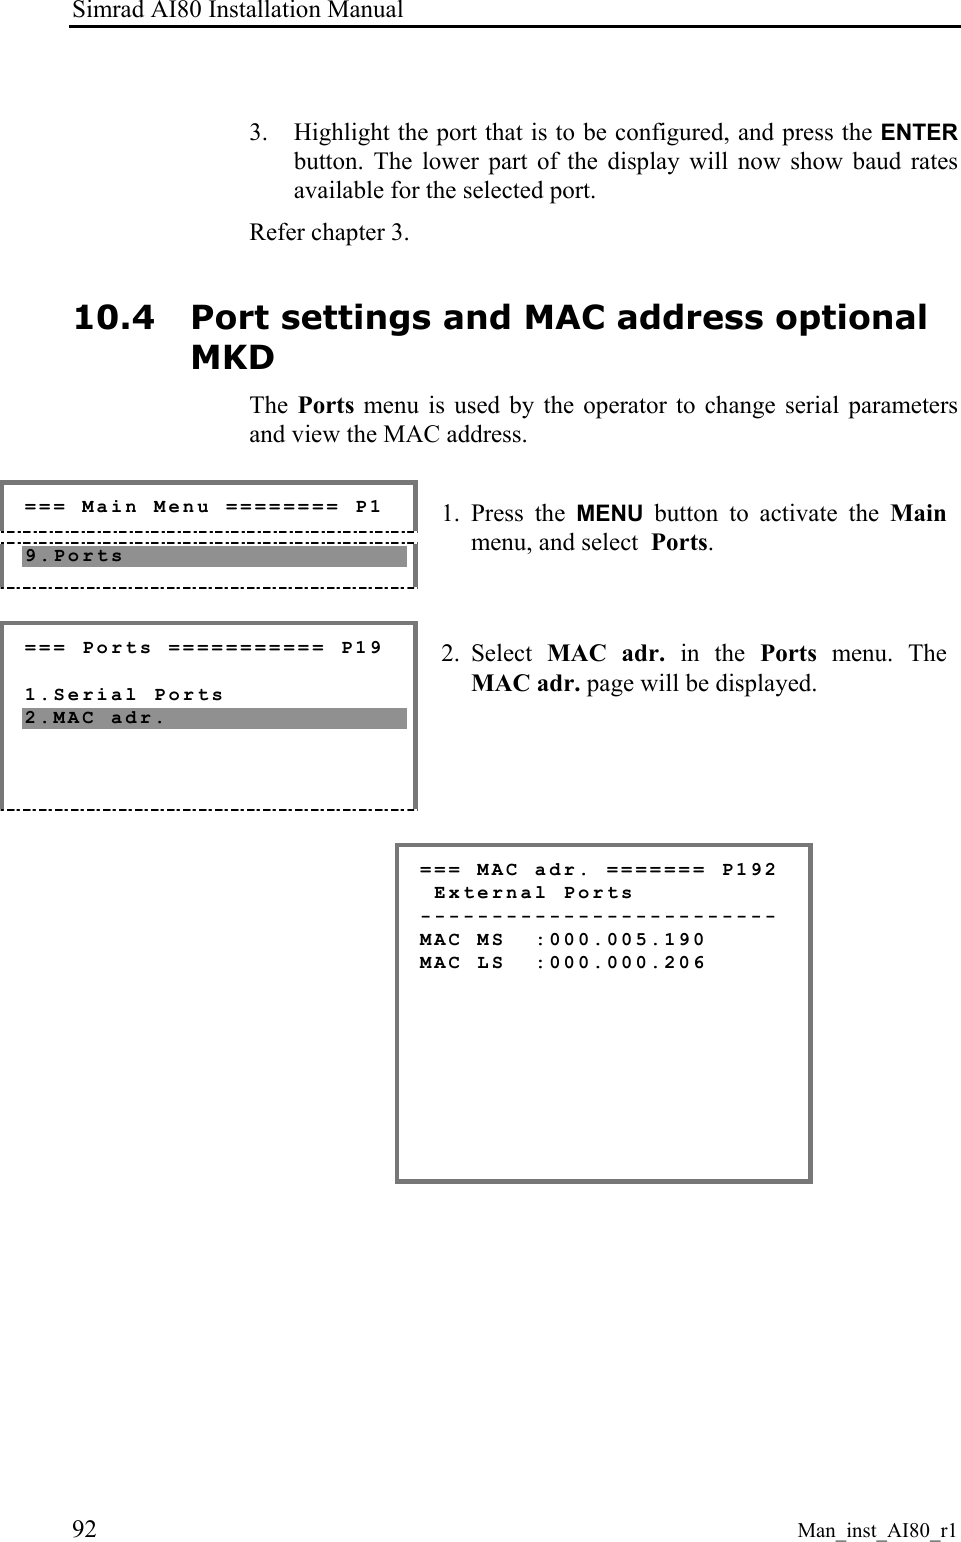 Simrad AI80 Installation Manual 92 Man_inst_AI80_r1  3. Highlight the port that is to be configured, and press the ENTER button. The lower part of the display will now show baud rates available for the selected port. Refer chapter 3. 10.4 Port settings and MAC address optional MKD The  Ports menu is used by the operator to change serial parameters and view the MAC address.   === Main Menu ======== P1 9.Ports  1. Press the MENU button to activate the Main menu, and select  Ports.  === Ports =========== P19  1.Serial Ports 2.MAC adr.  2. Select  MAC adr. in the Ports  menu. The MAC adr. page will be displayed.  === MAC adr. ======= P192  External Ports ------------------------- MAC MS  :000.005.190 MAC LS  :000.000.206         